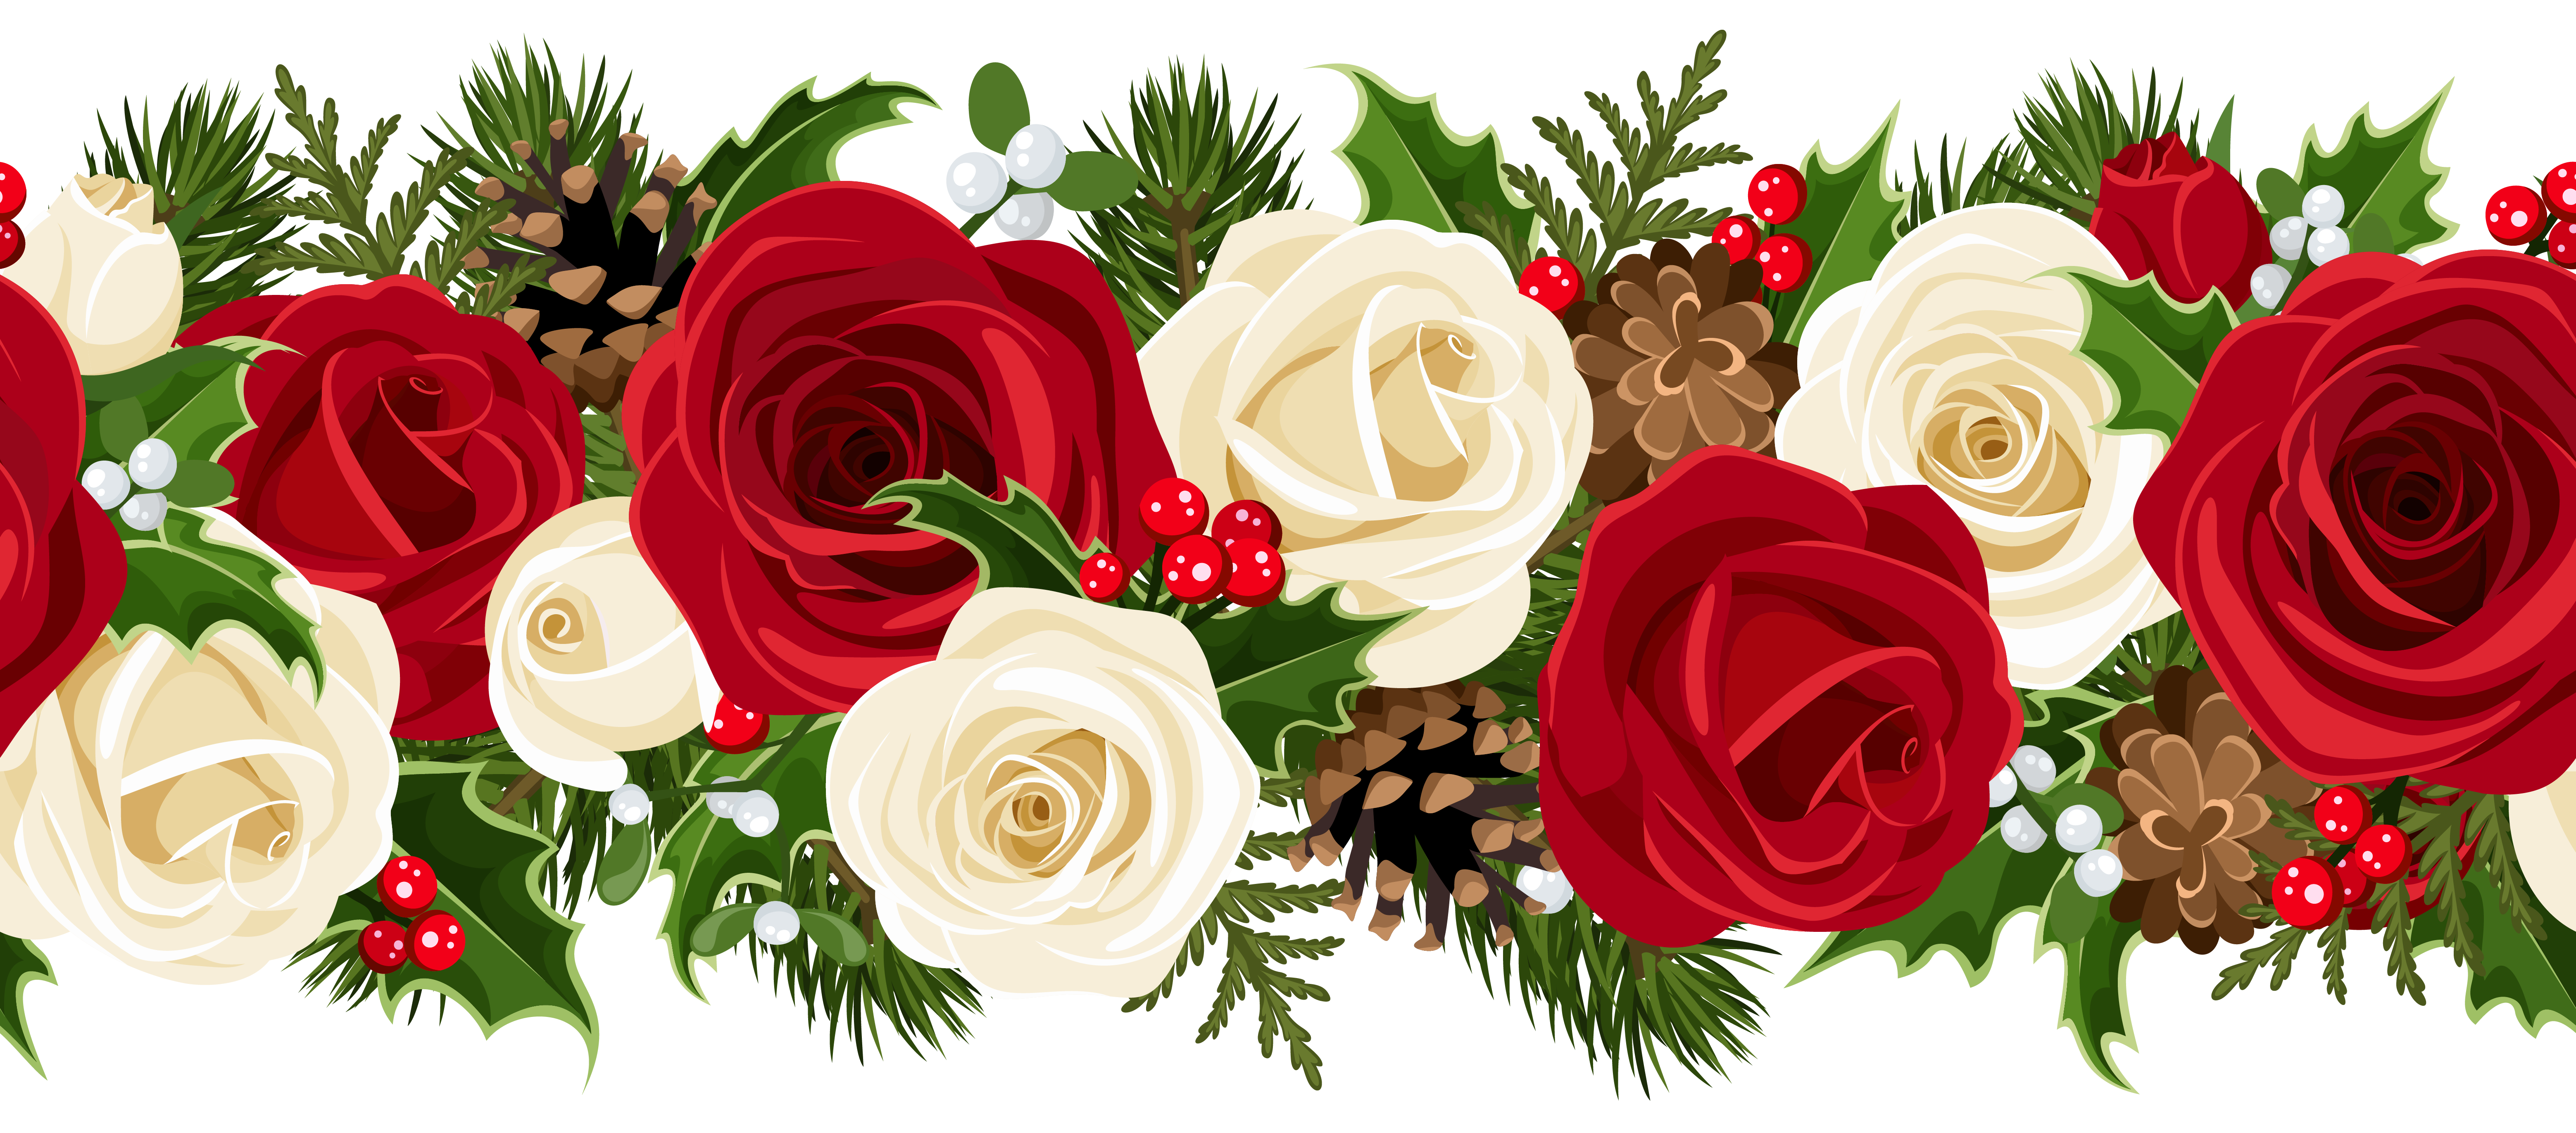 christmas rose clipart - photo #3